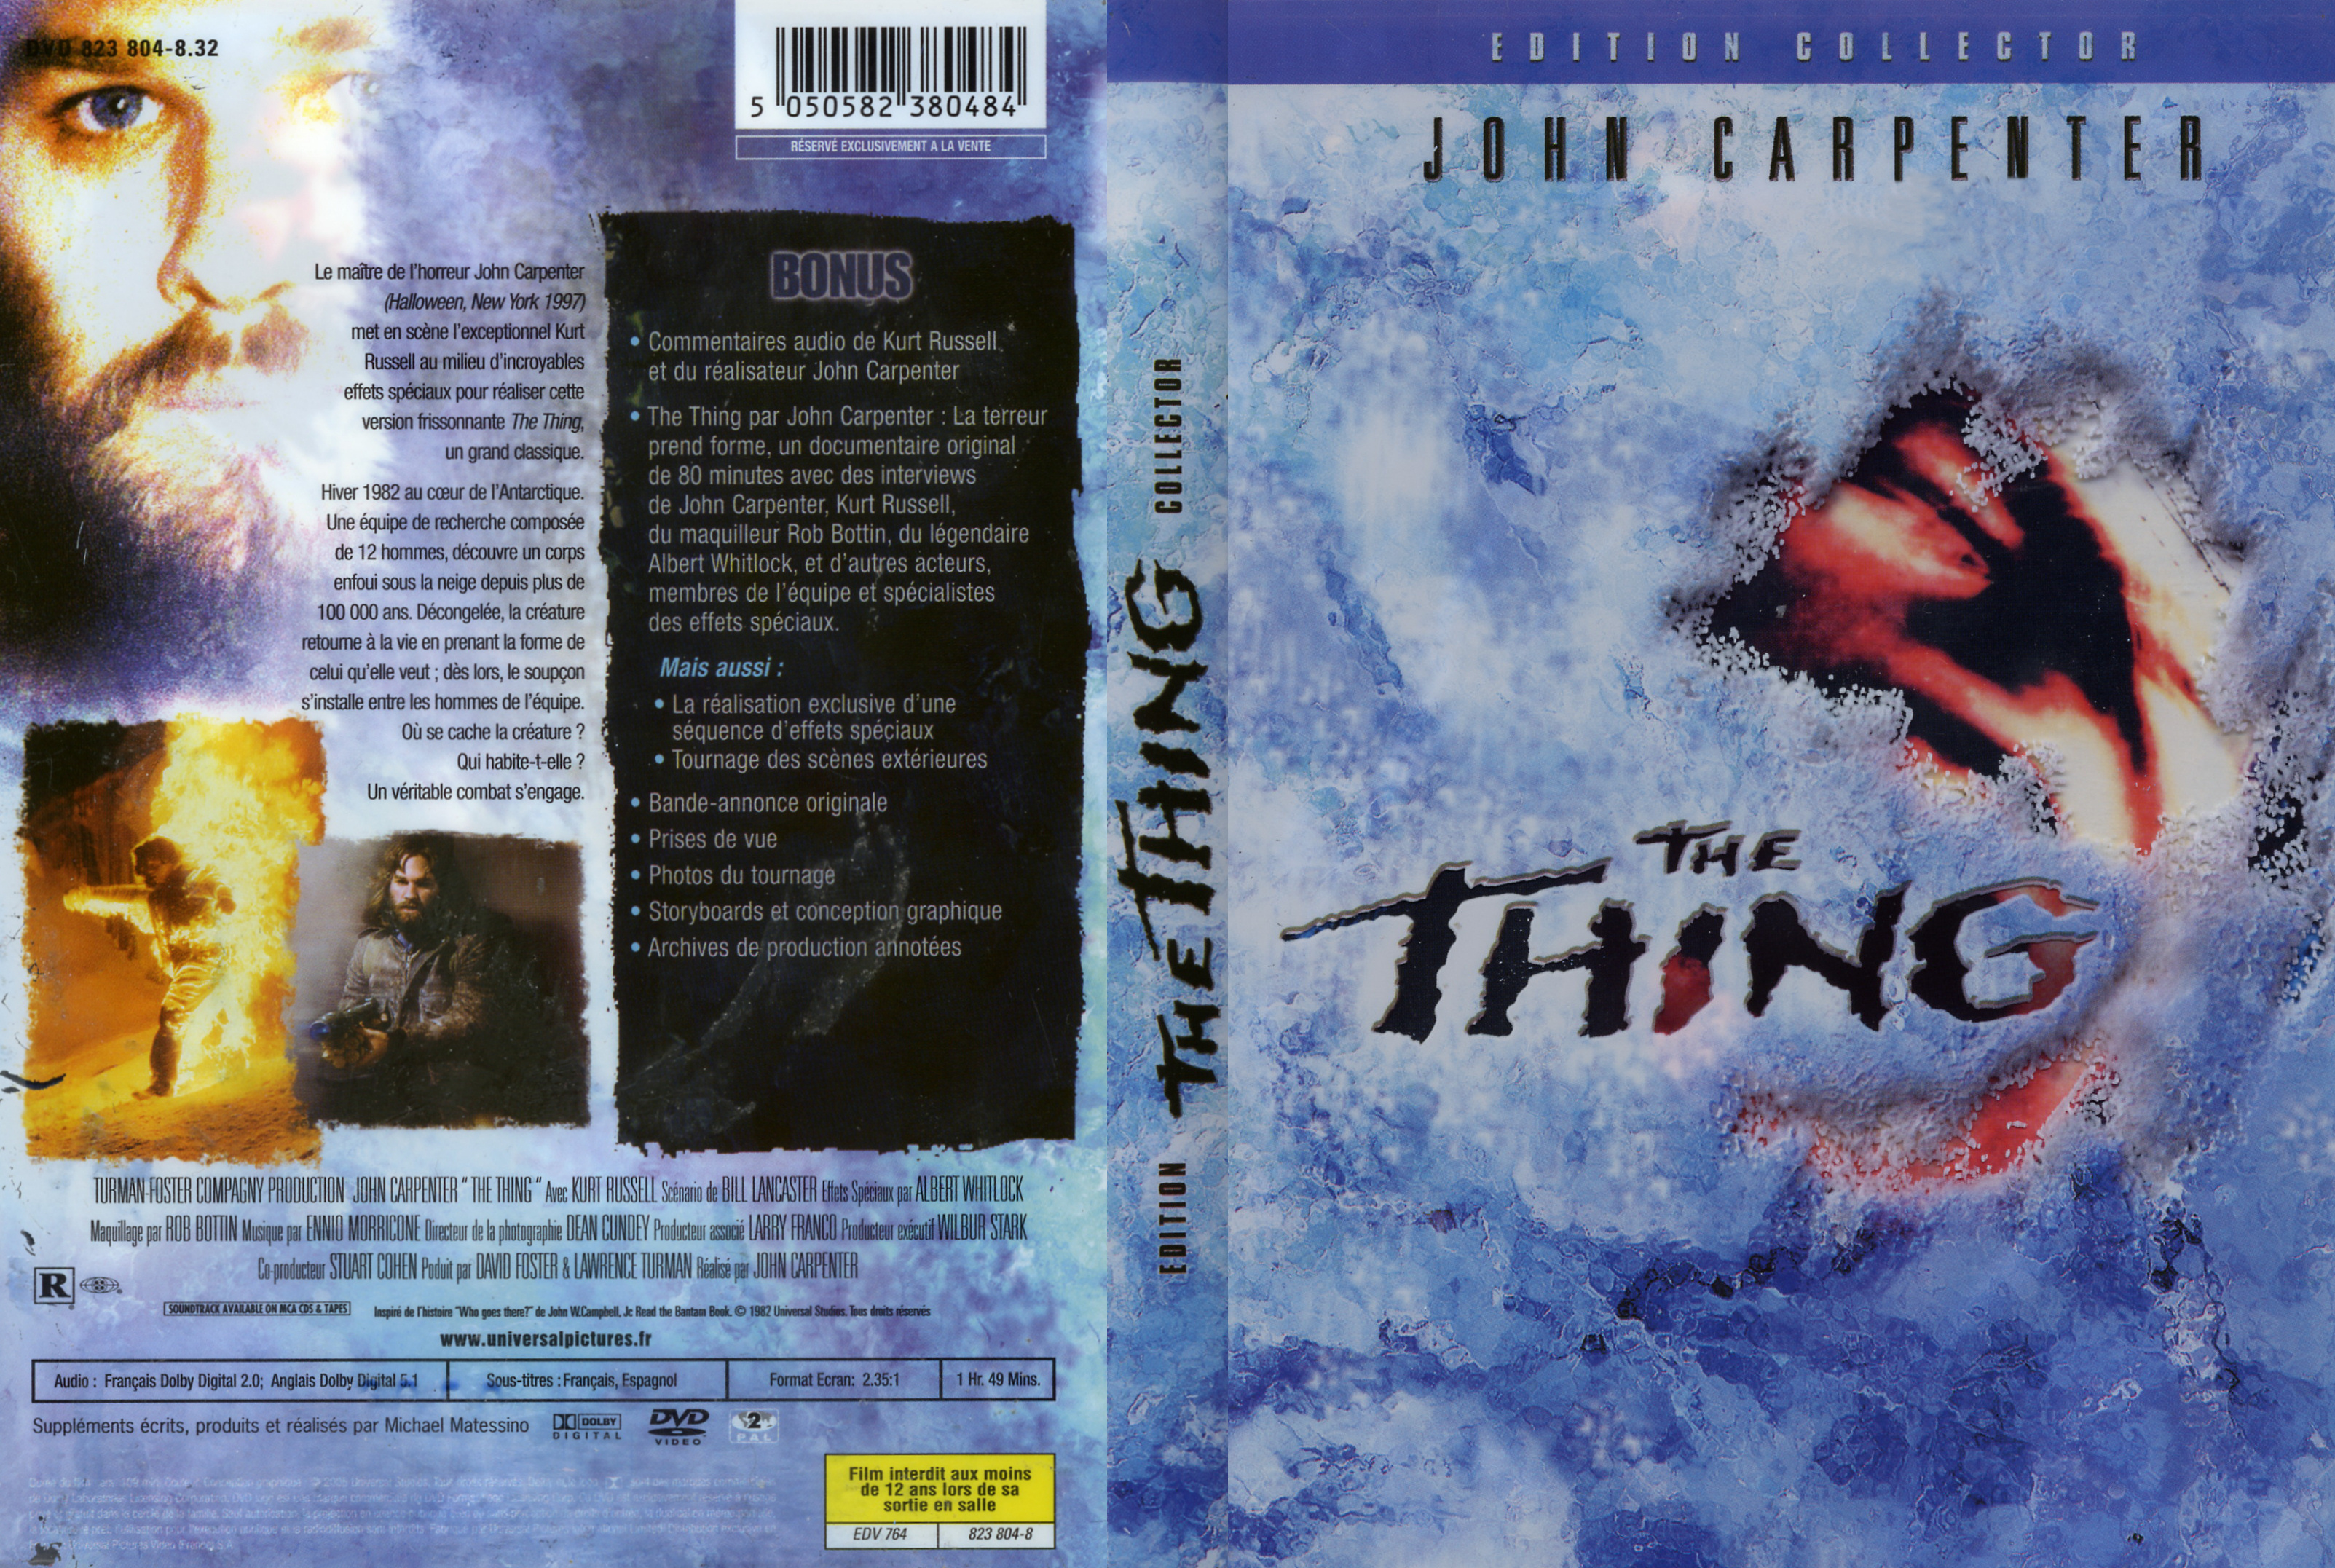 Jaquette DVD The thing v2